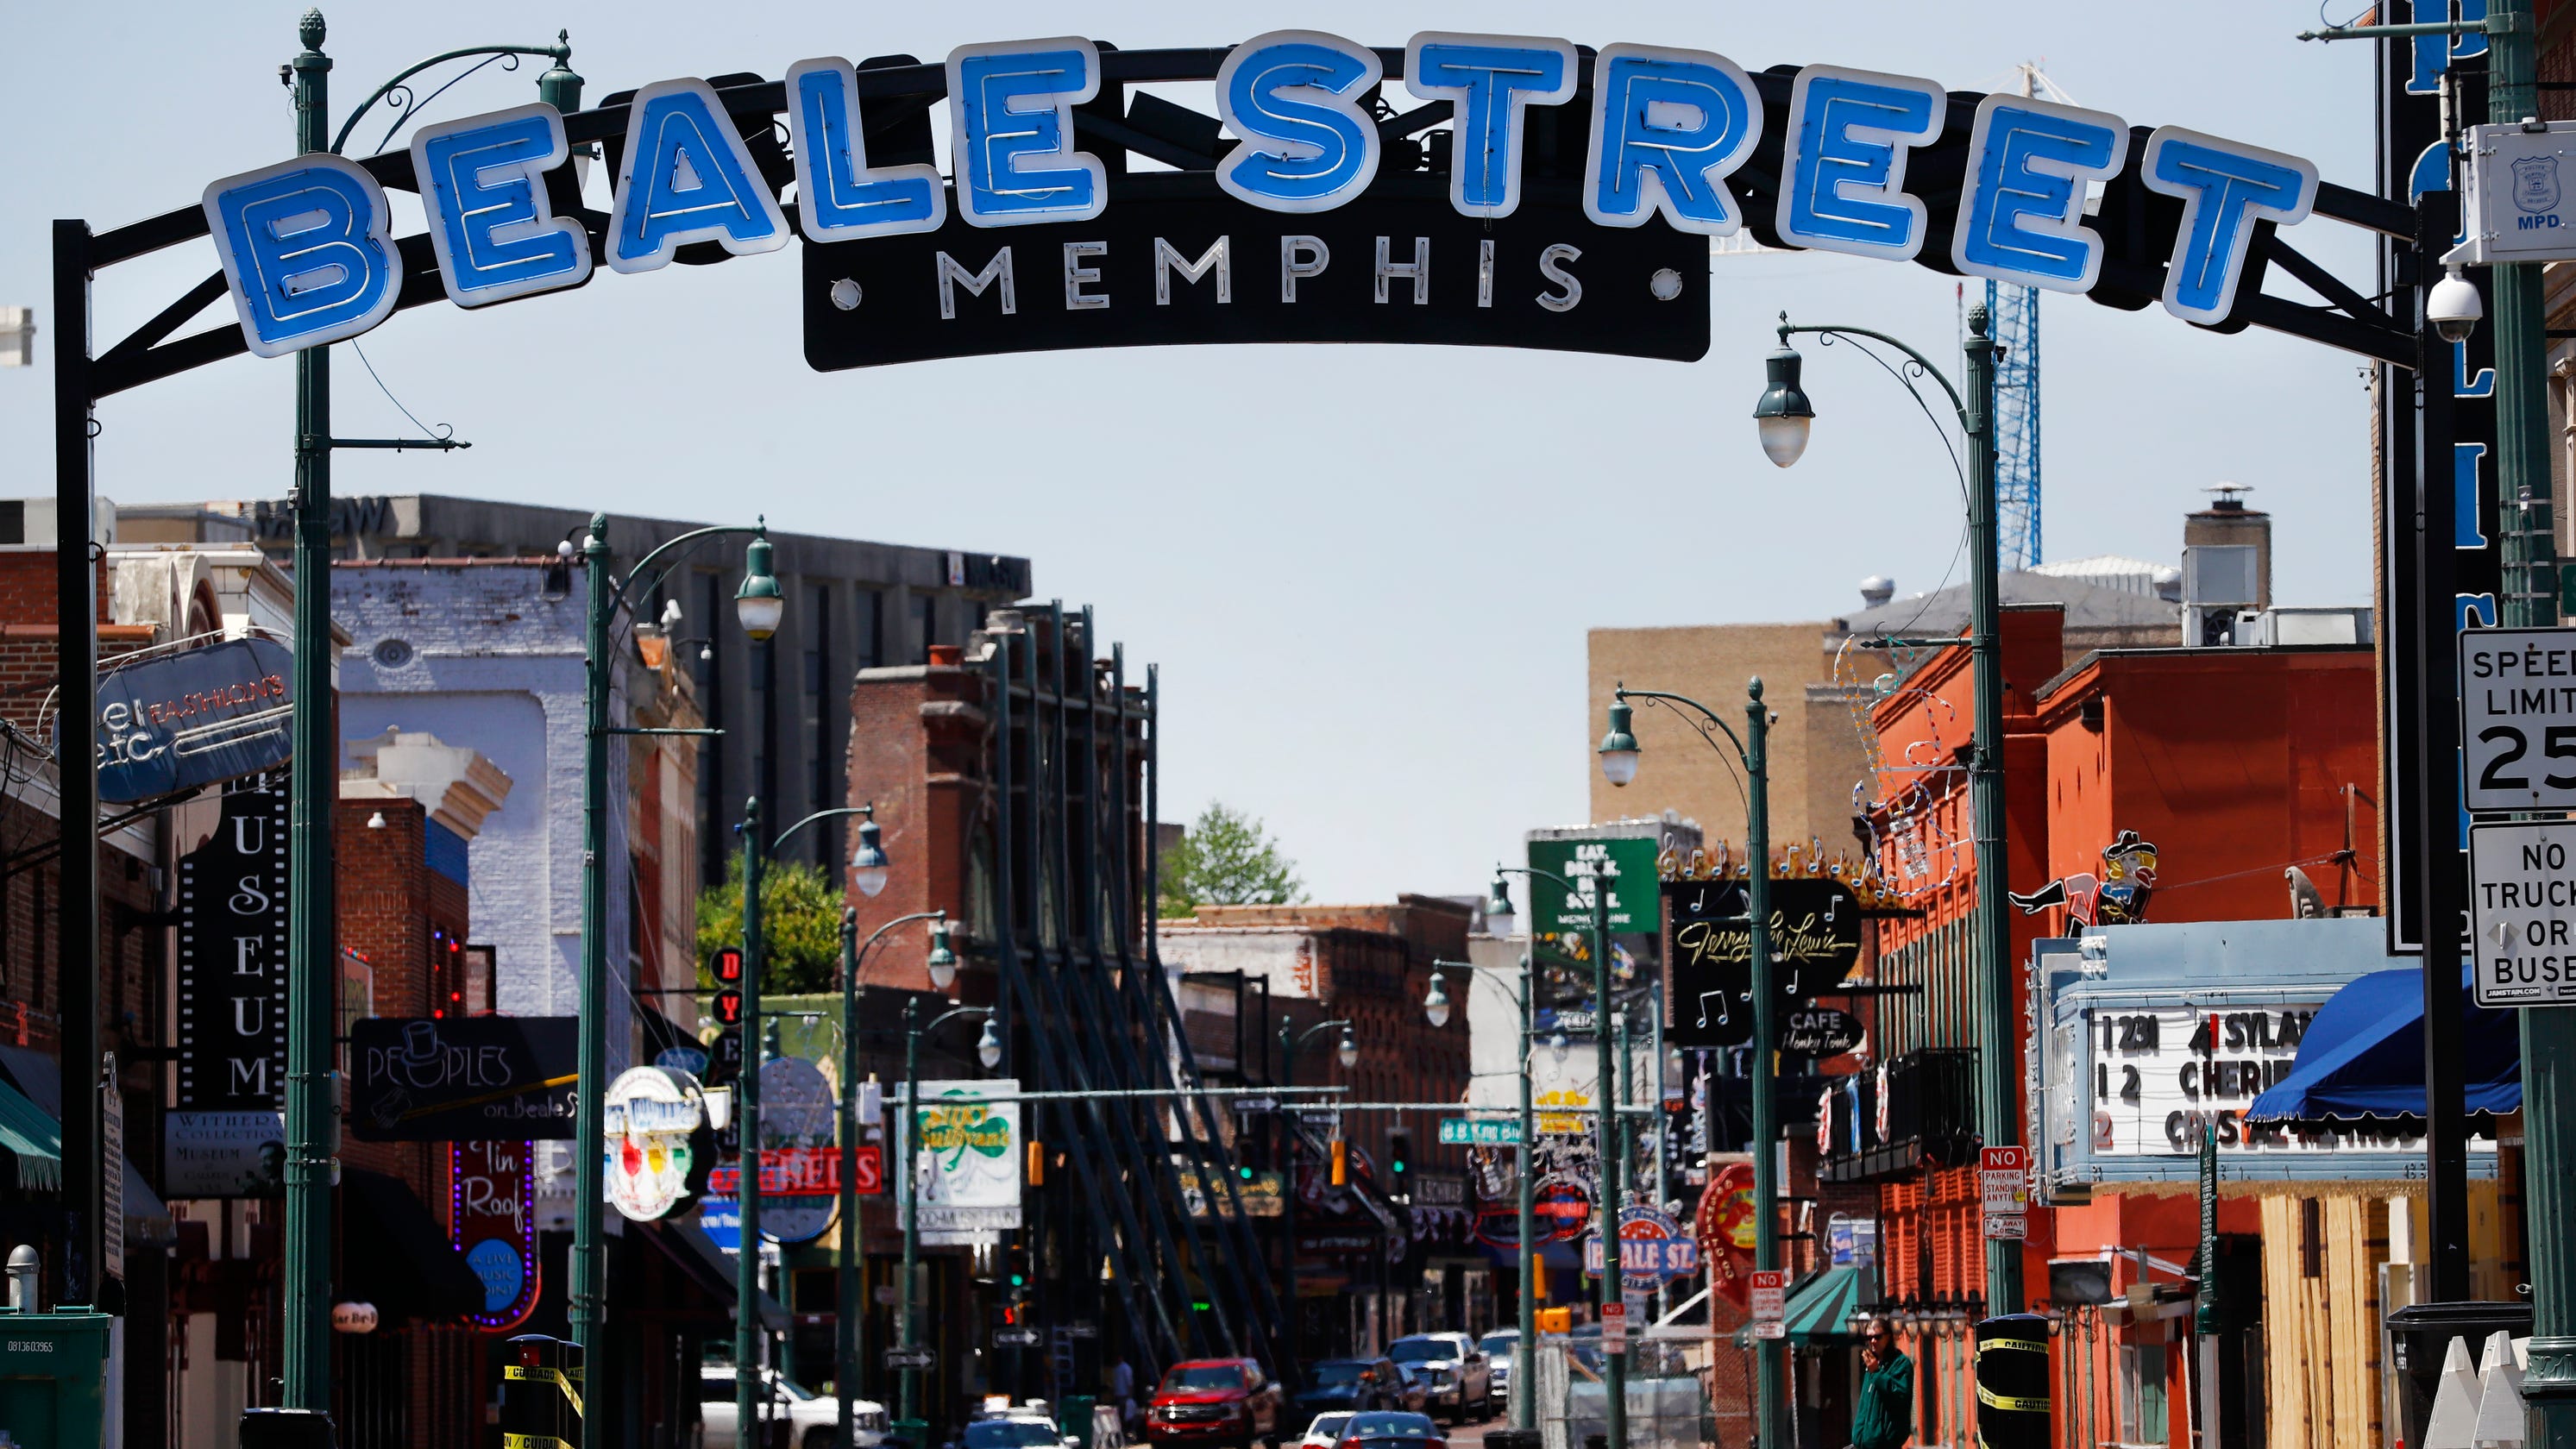 As Memphis reopens, Beale Street starts to welcome visitors again